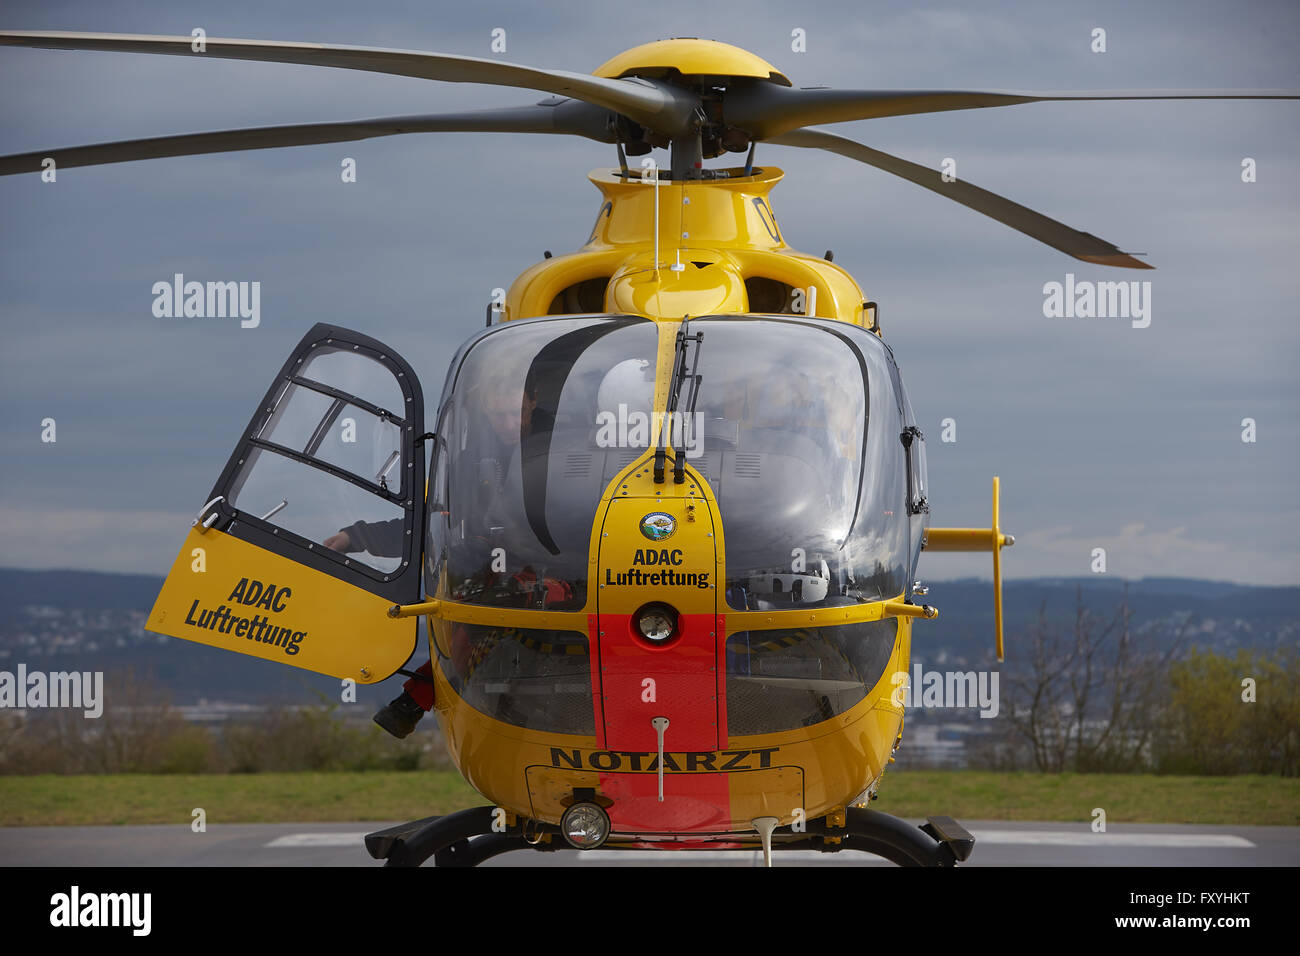 ADAC rescue helicopter Eurocopter EC 135 starting, air rescue, emergency, Germany Stock Photo